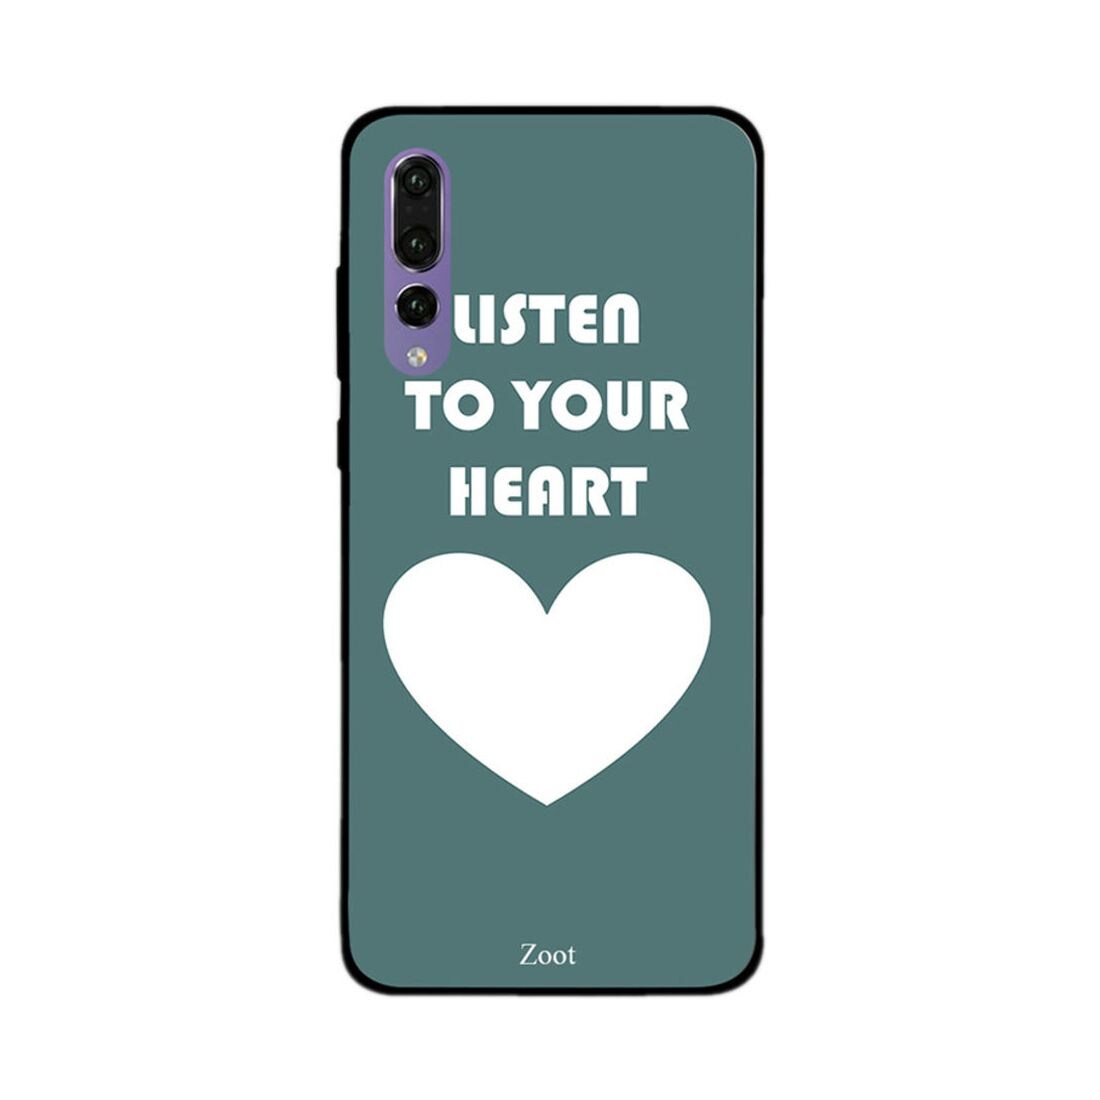 Thermoplastic Polyurethane Protective Case Cover For Huawei P20 Pro Listen To Your Heart